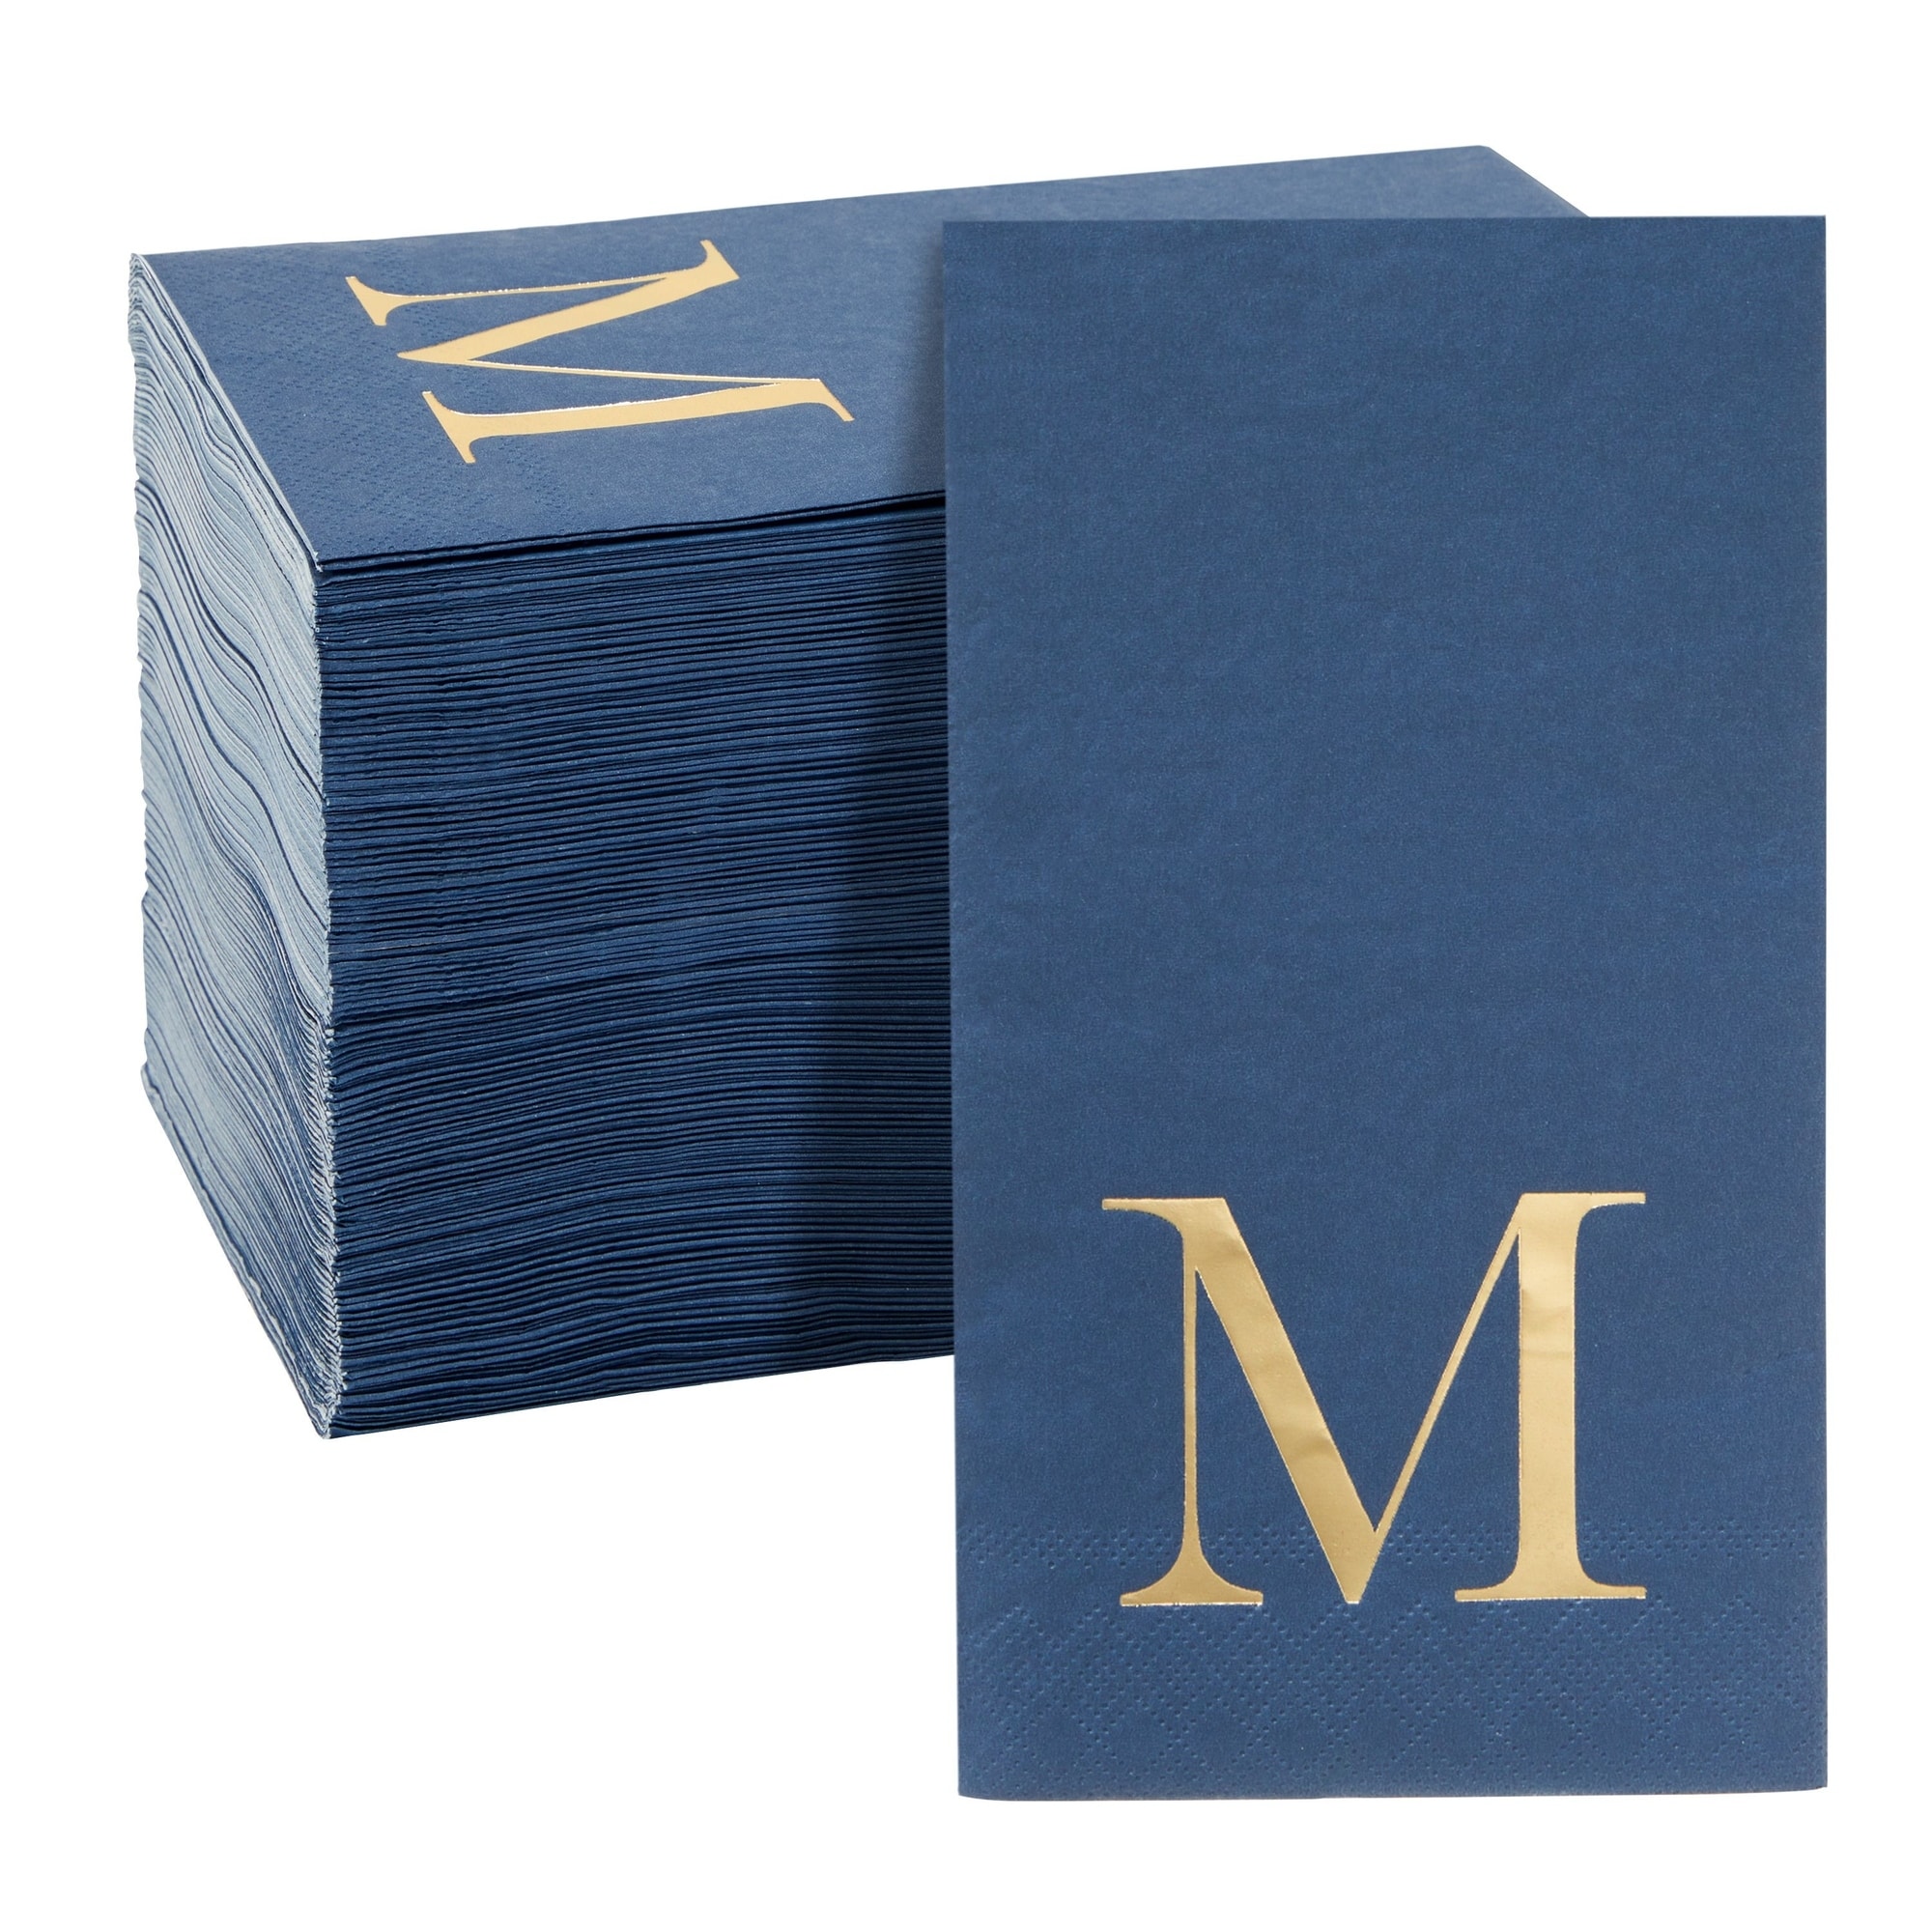 https://ak1.ostkcdn.com/images/products/is/images/direct/74d2e41fbd4305f87f381a4ede93a926473bfe0e/100-Pack-Navy-Blue-Monogrammed-Napkins-with-Letter-M%2C-Gold-Foil-Initial-for-Wedding-Reception%2C-Engagement-Party-%284x8-Inches%29.jpg